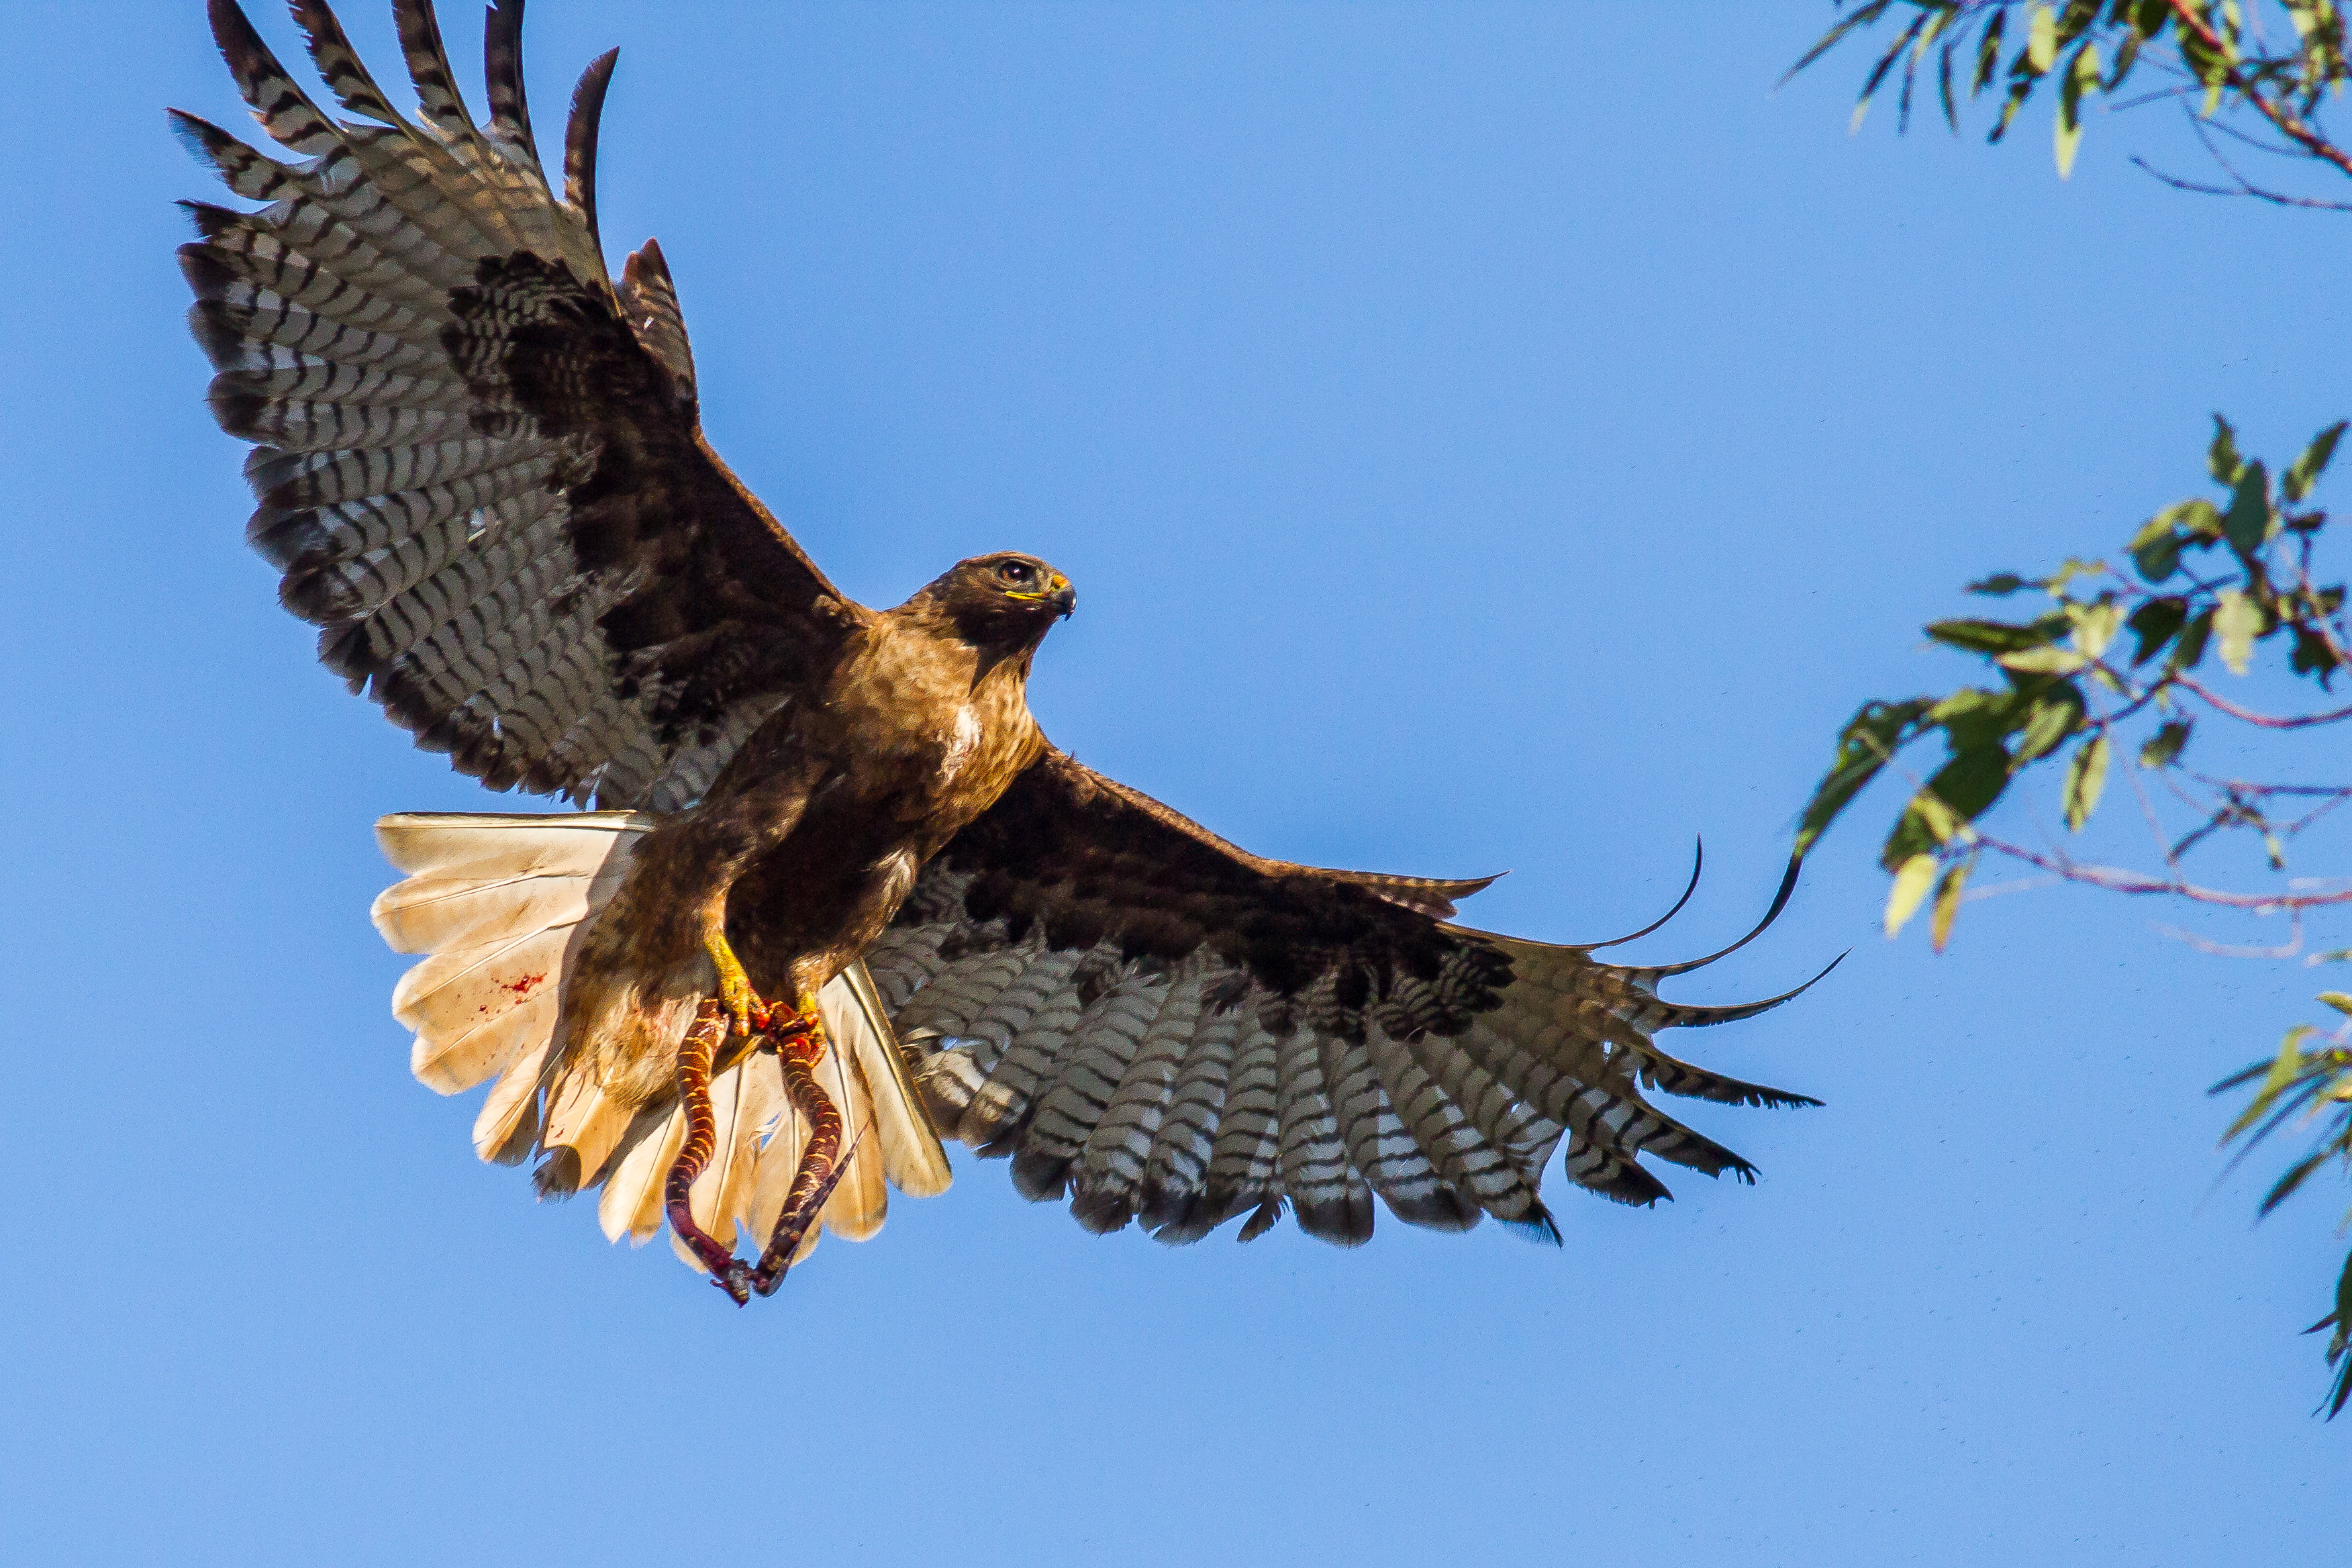 Red-tailed hawk with a kingsnake